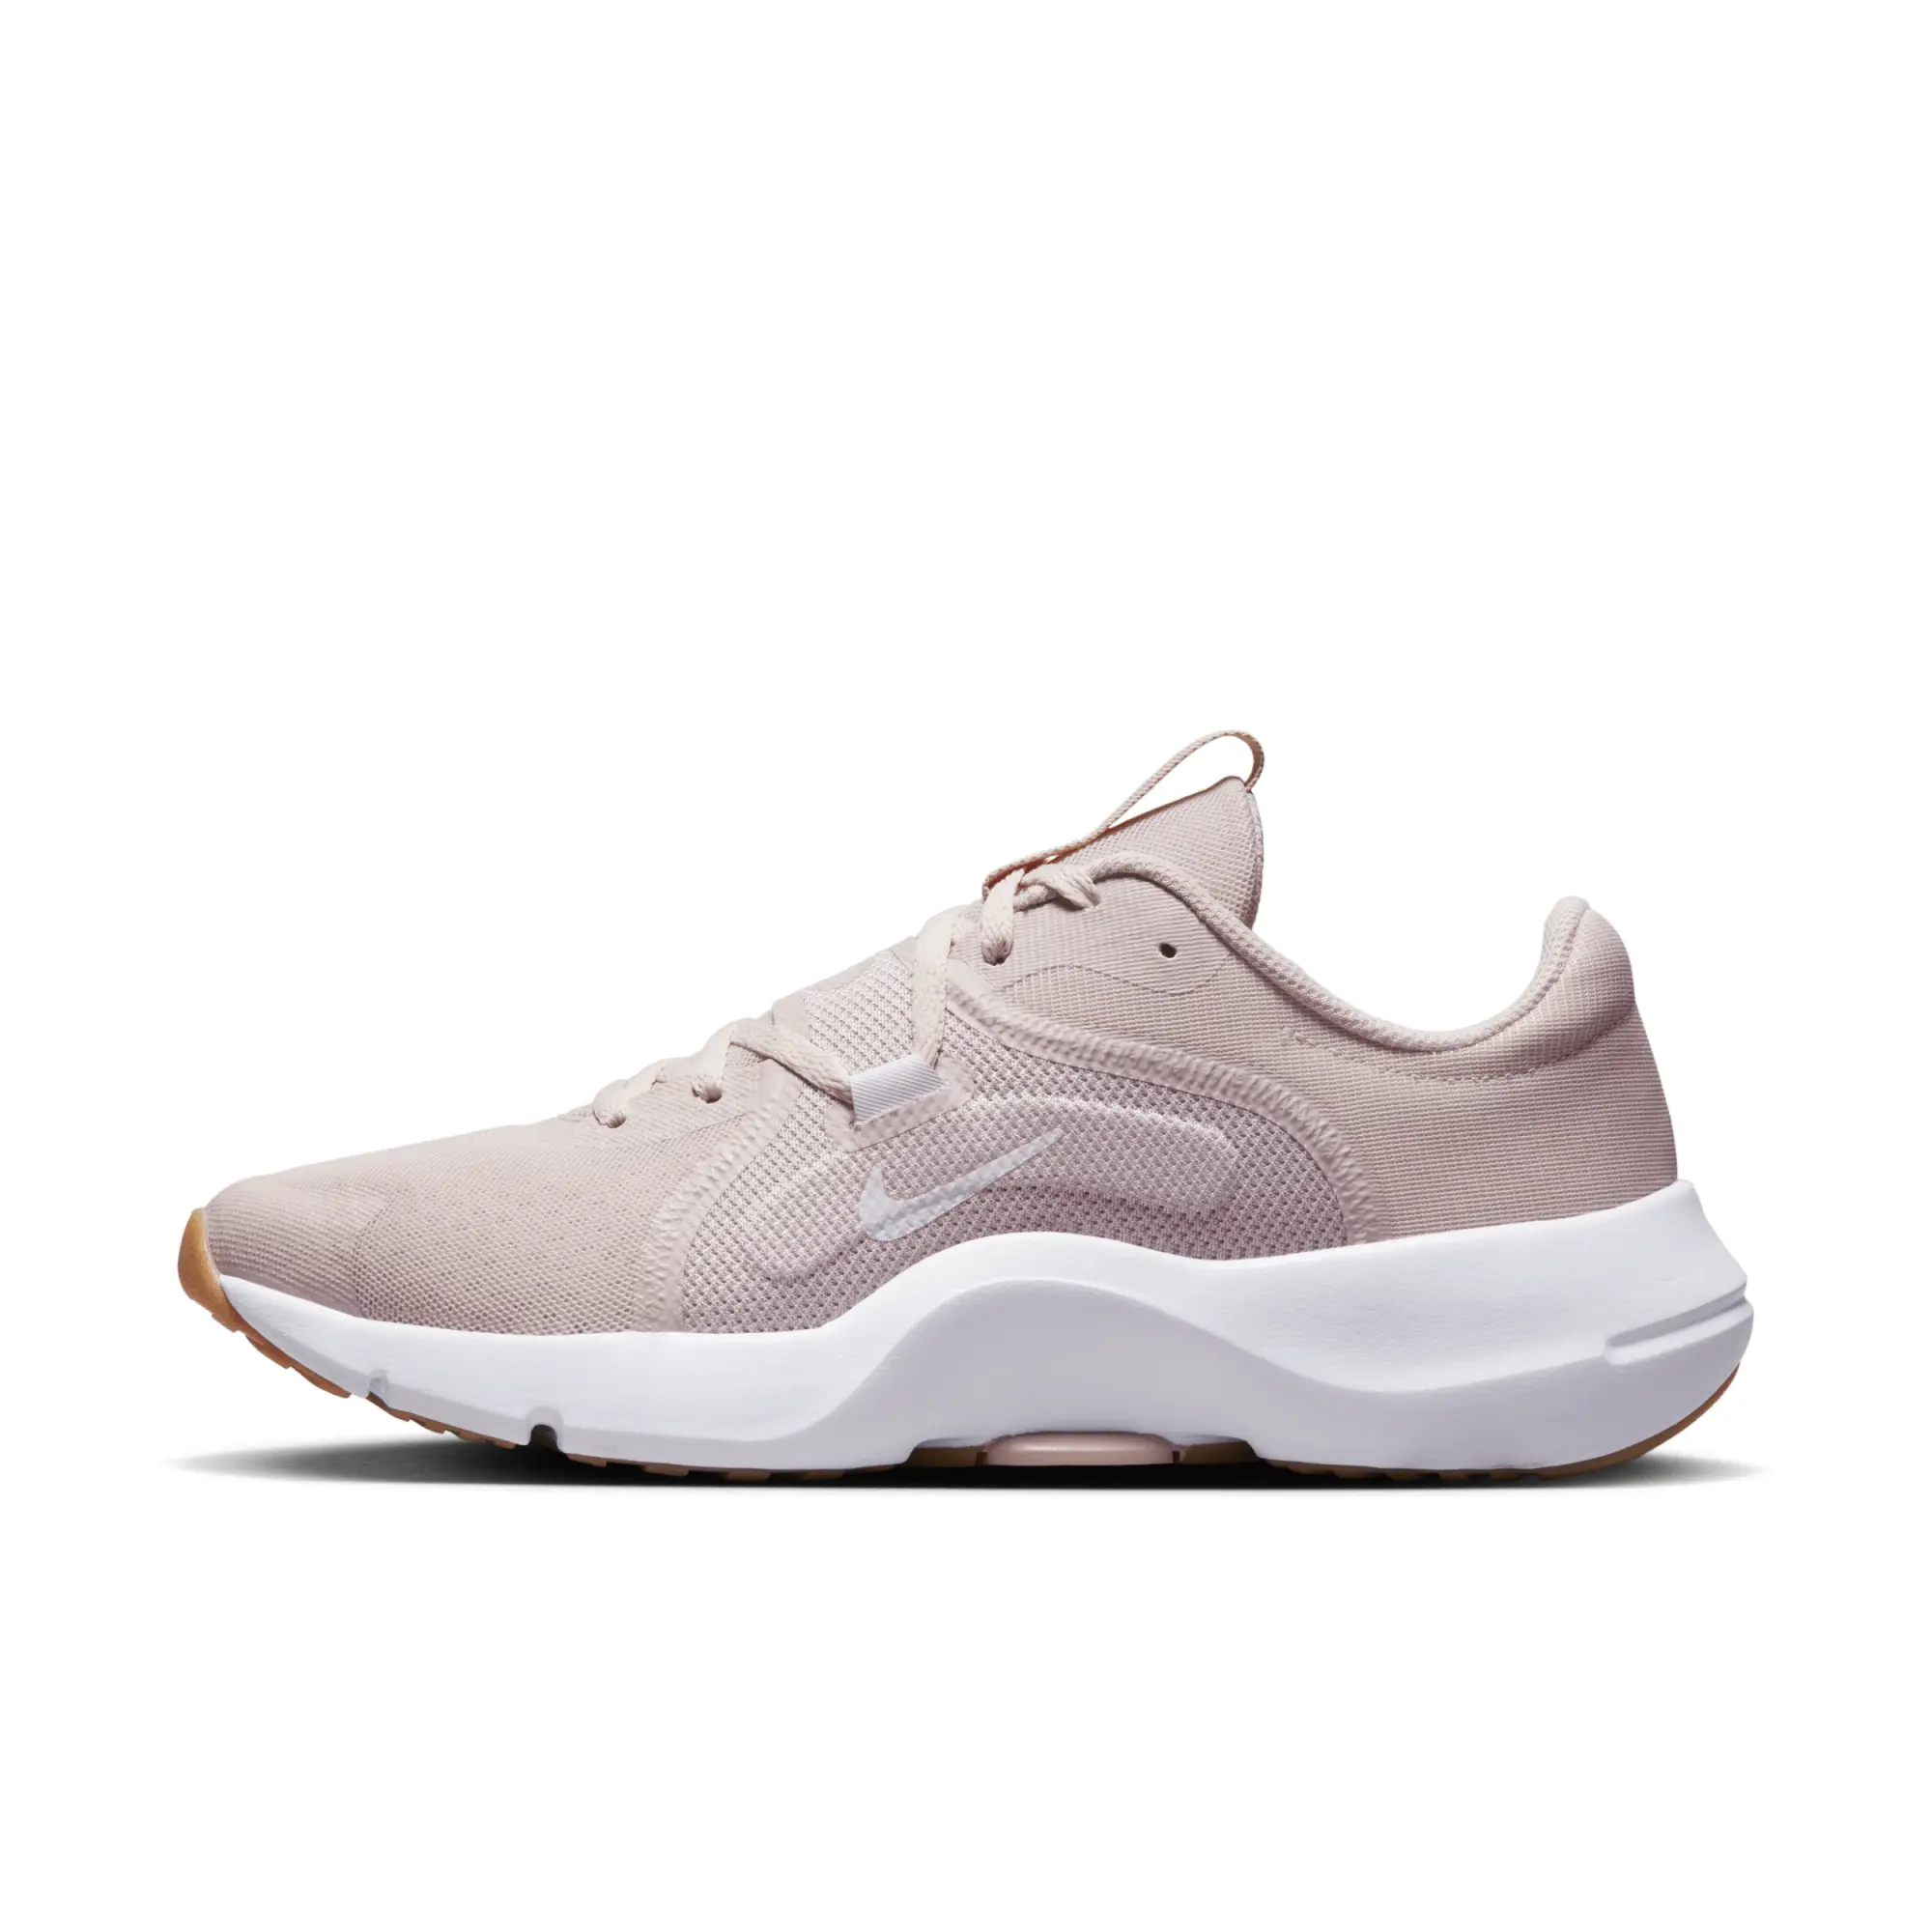 Nike Training In-Season Tr 13 Trainers In Pale Pink